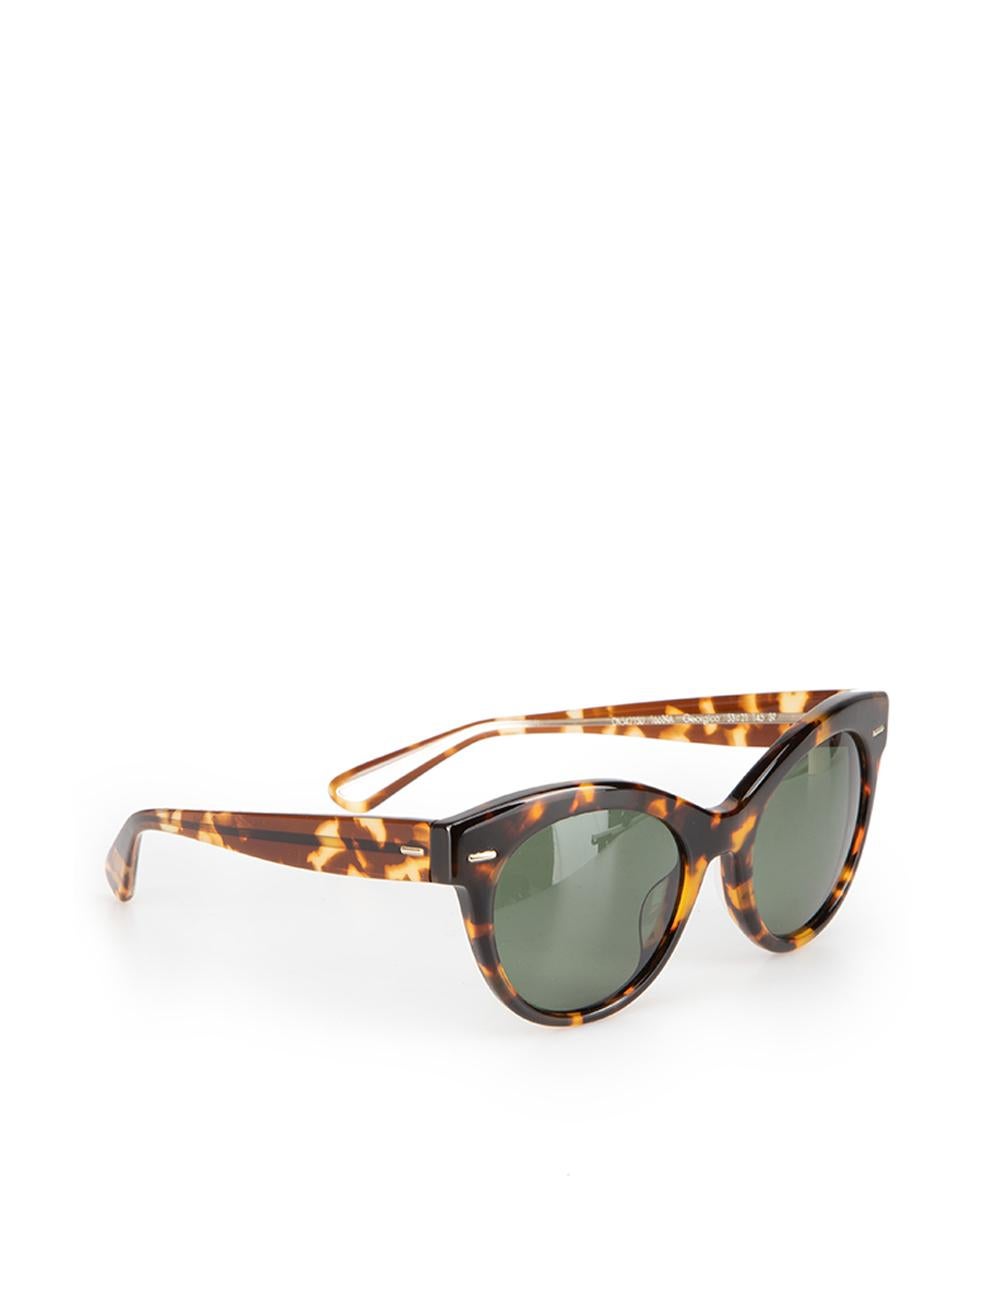 CONDITION is Very good. Hardly any visible wear to sunglasses is evident on this used Oliver Peoples designer resale item. This item comes with original case.



Details


Brown

Acetate

Cat eye sunglasses

Tortoiseshell pattern





Made in